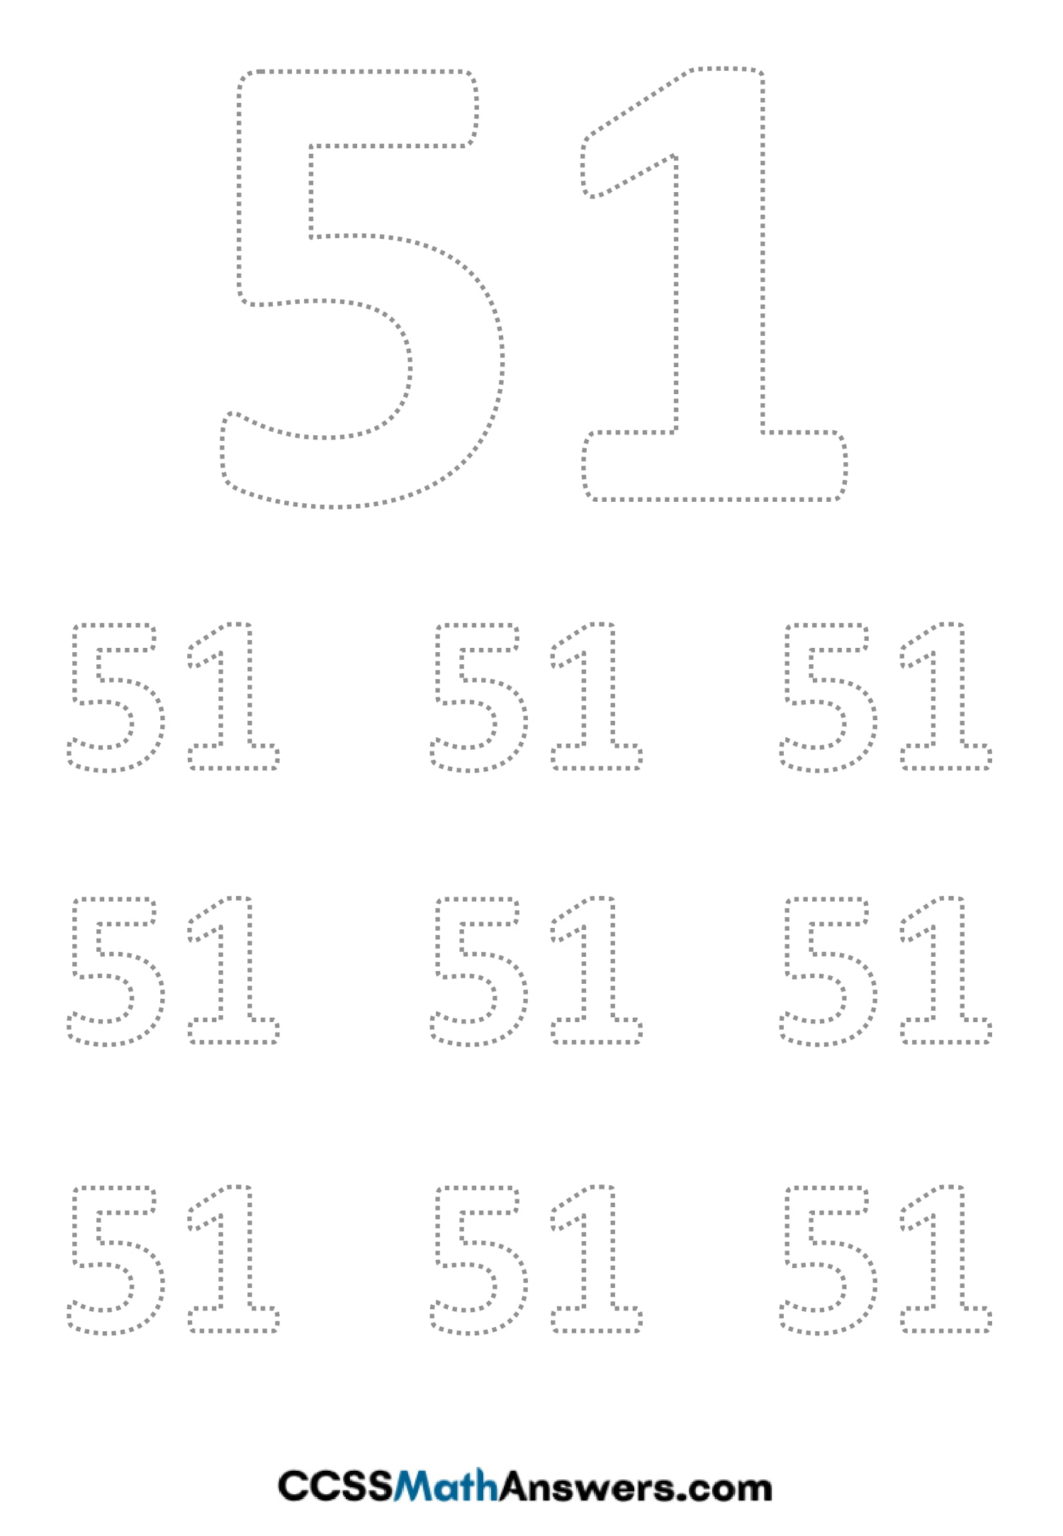 Worksheet On Number 51 Free Printable Number 51 Tracing Handwriting Activity Sheets For